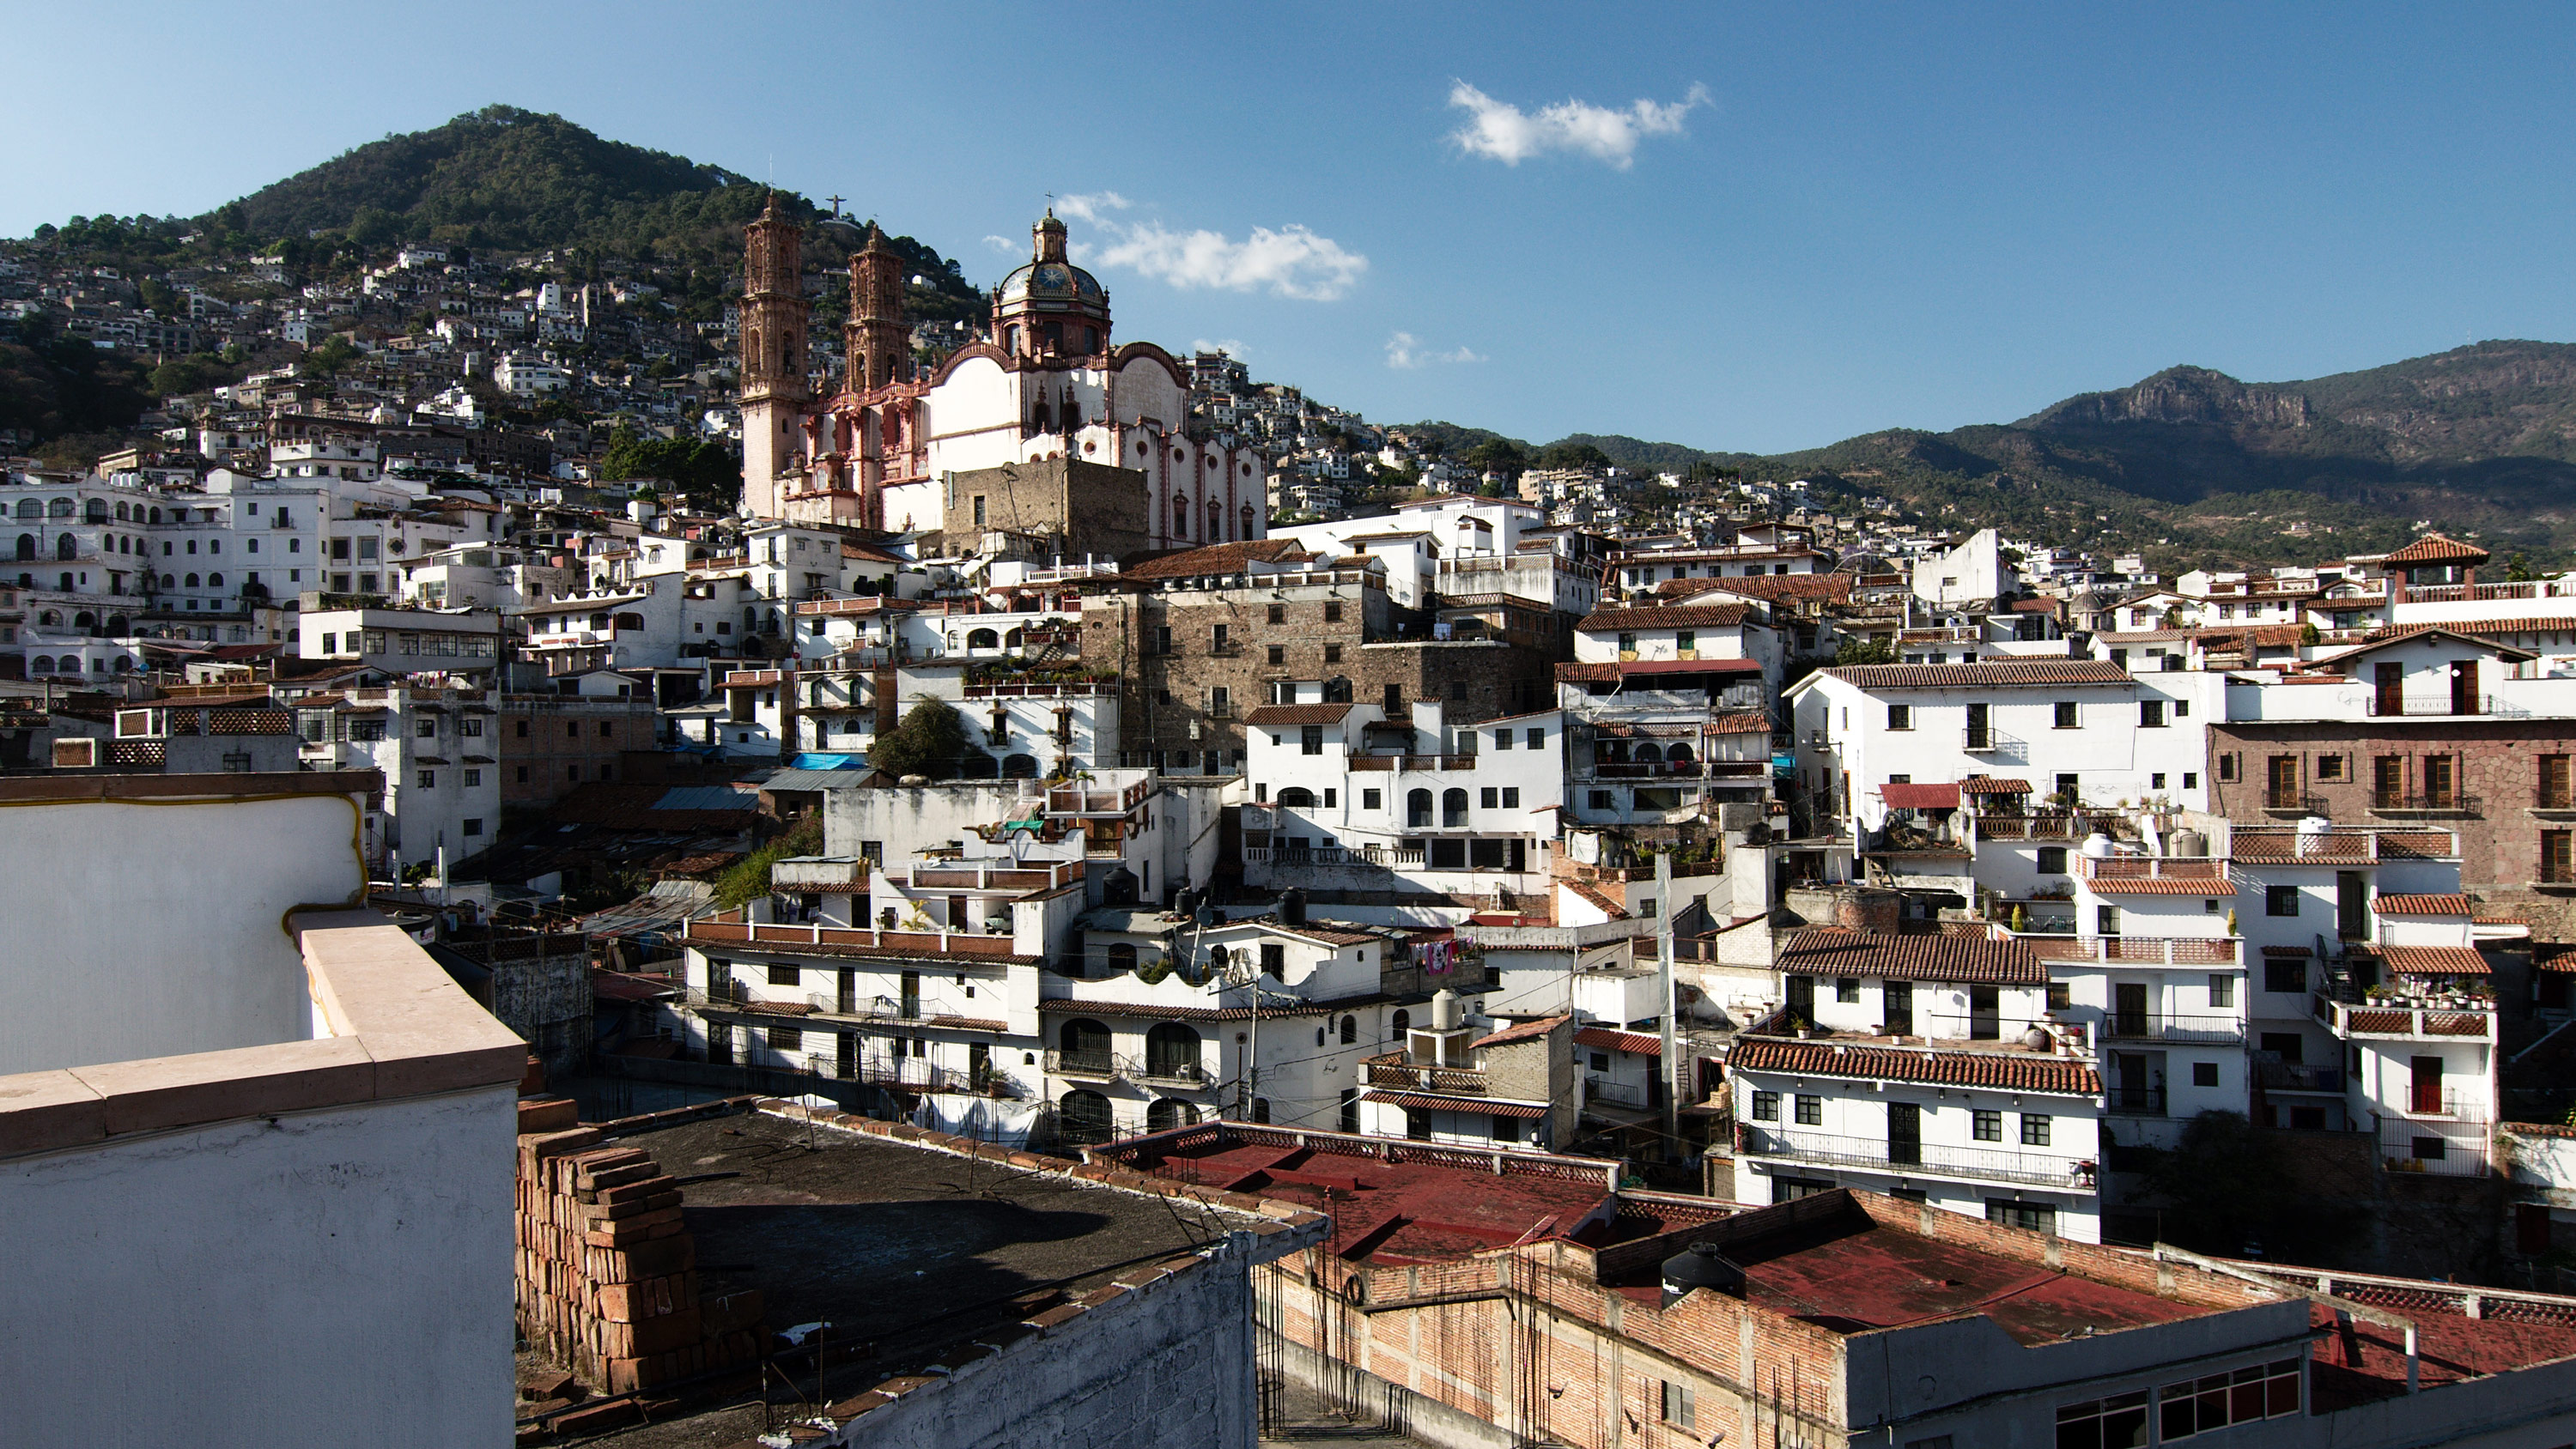 10 most beautiful small towns in Mexico | CNN Travel